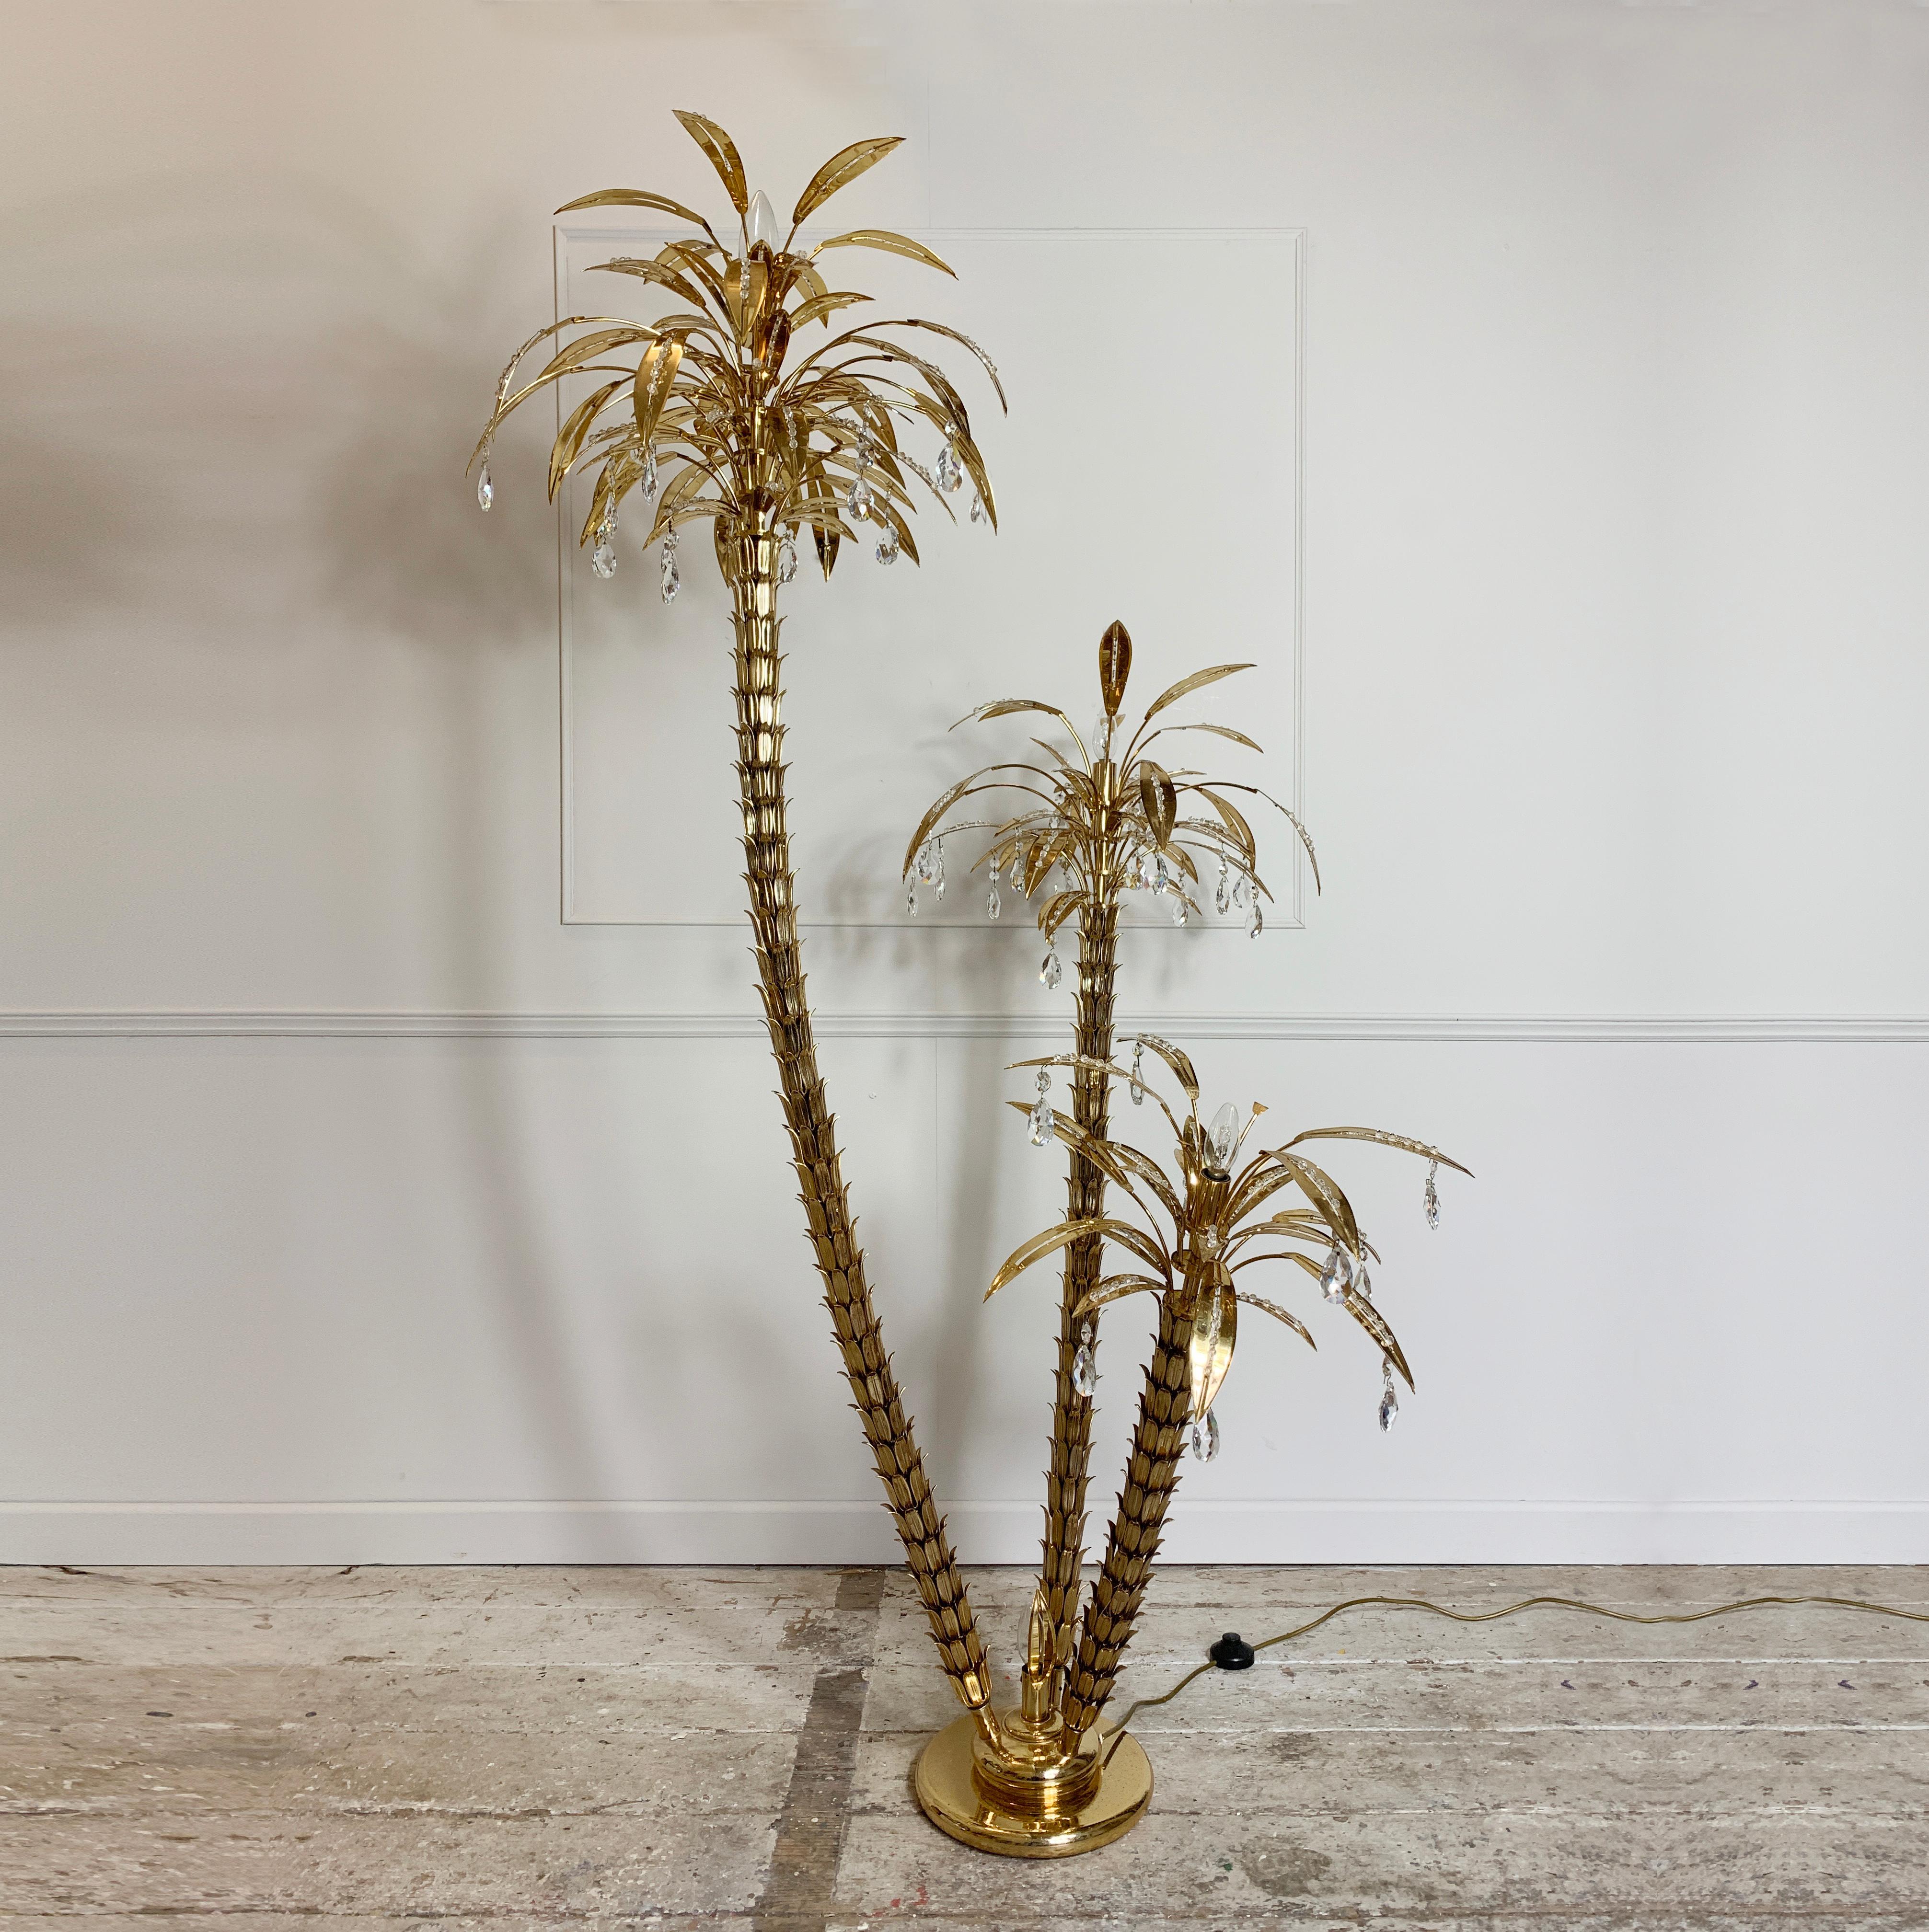 Large statement gilt and crystal palm tree floor lamp,
1970s, Italy
Three gilt brass palm trees are set into a weighted gilt base
The palm heads are full with brass leaves inset with glass crystals and hanging drops
Measures: 182cm height, 115cm